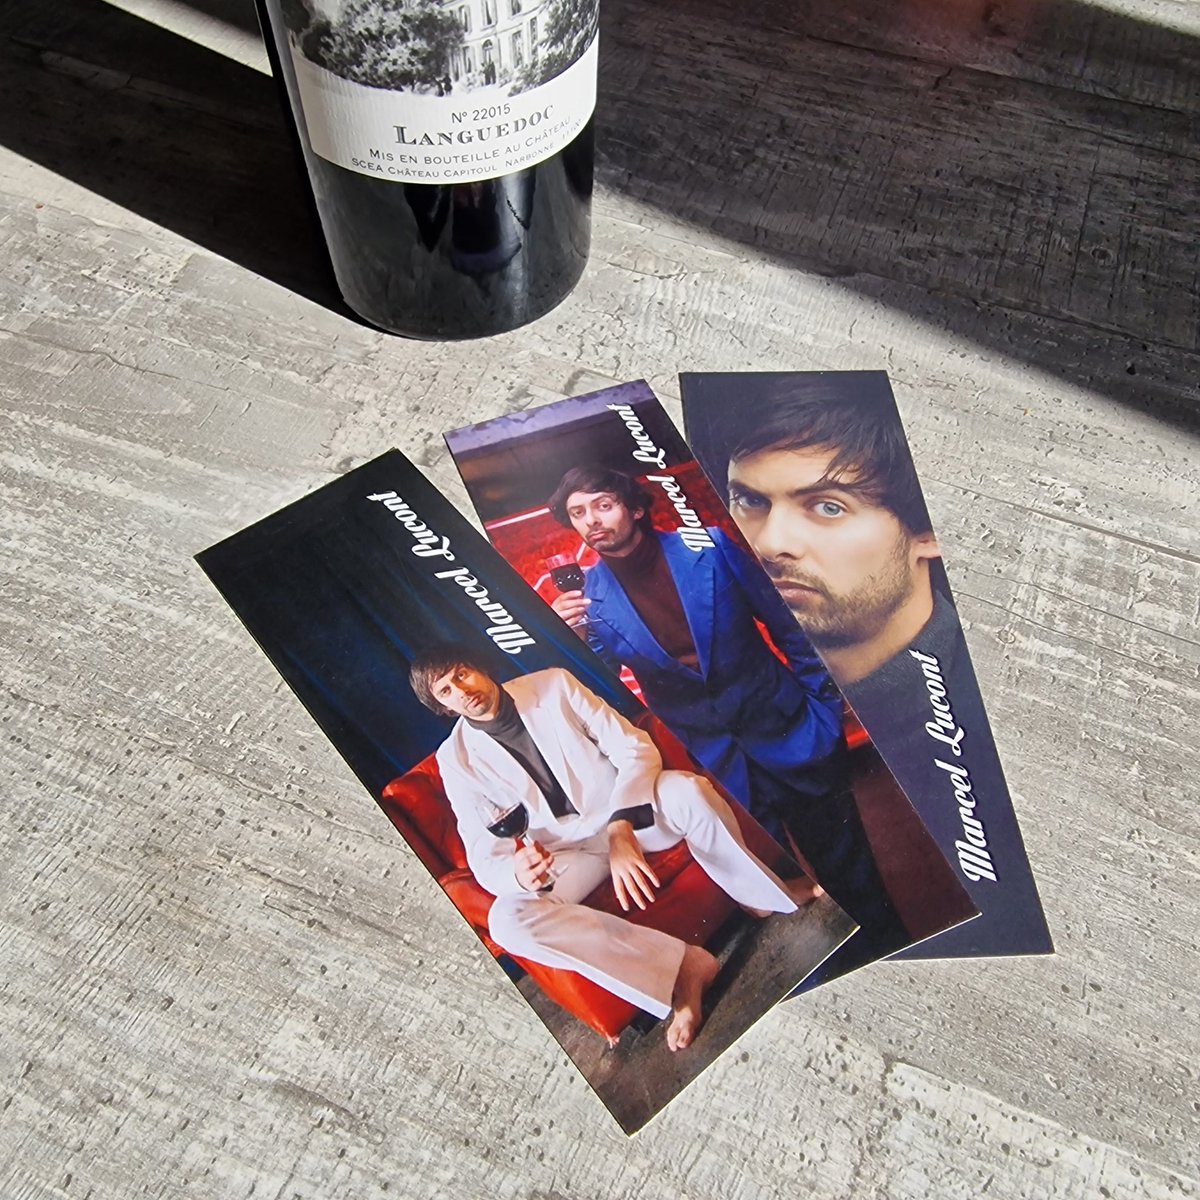 The new bookmark collection has arrived. Pre-orders were sent out today, now the rest of you can own a party of cultural history. Poems on the reverse: - Baise-Moi Ce Soir Dans Le Pissoir - Let's Go Wild - Wine In A Can marcellucont.bandcamp.com/merch/3-marcel…